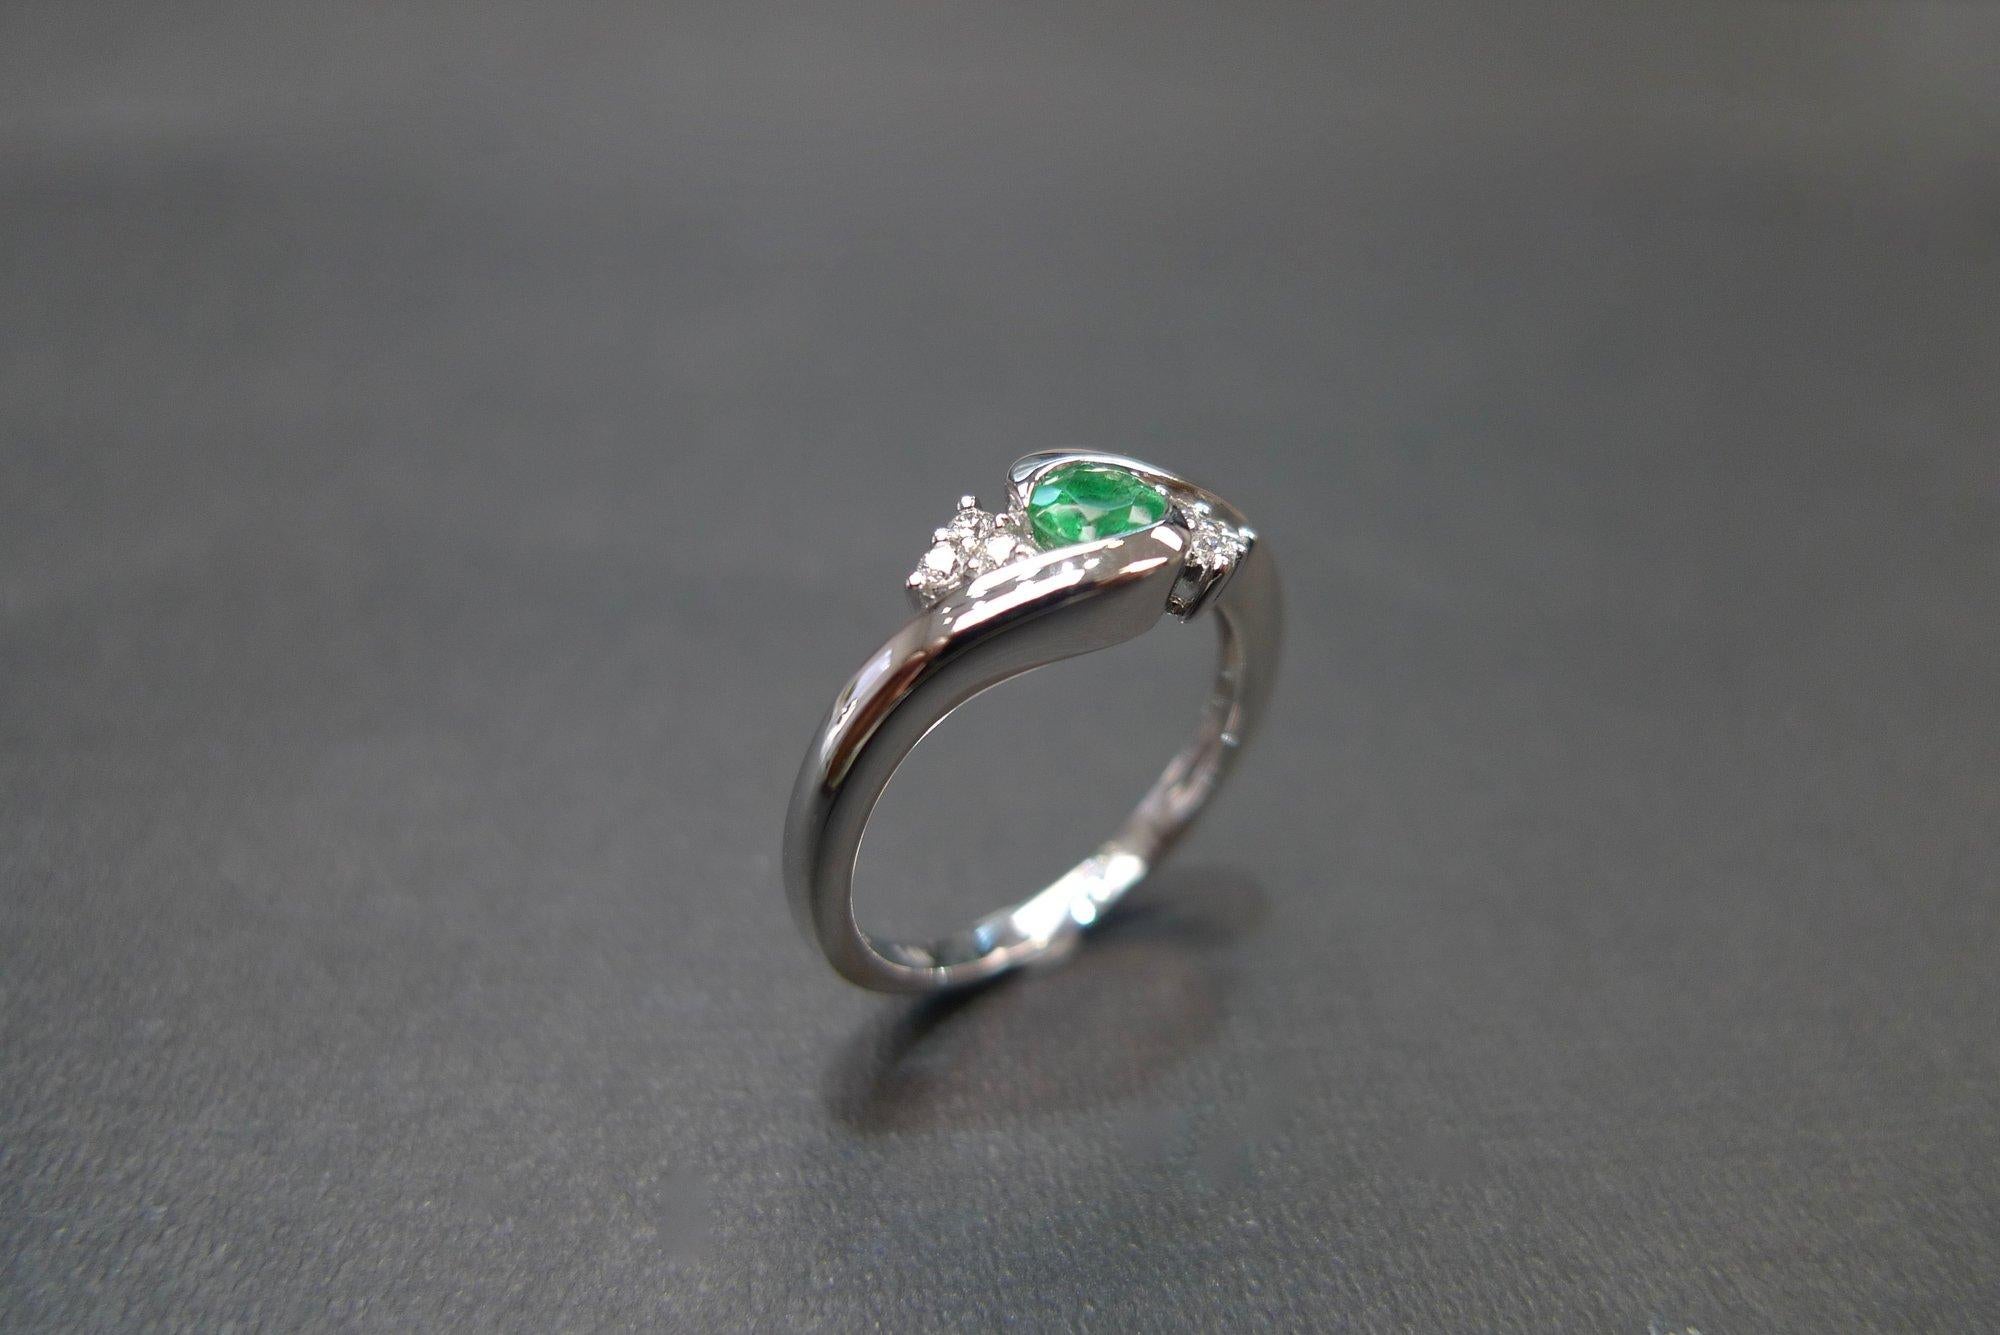 For Sale:  Tension Twist Round Cut Emerald and Diamond Engagement Ring in 18K White Gold 8